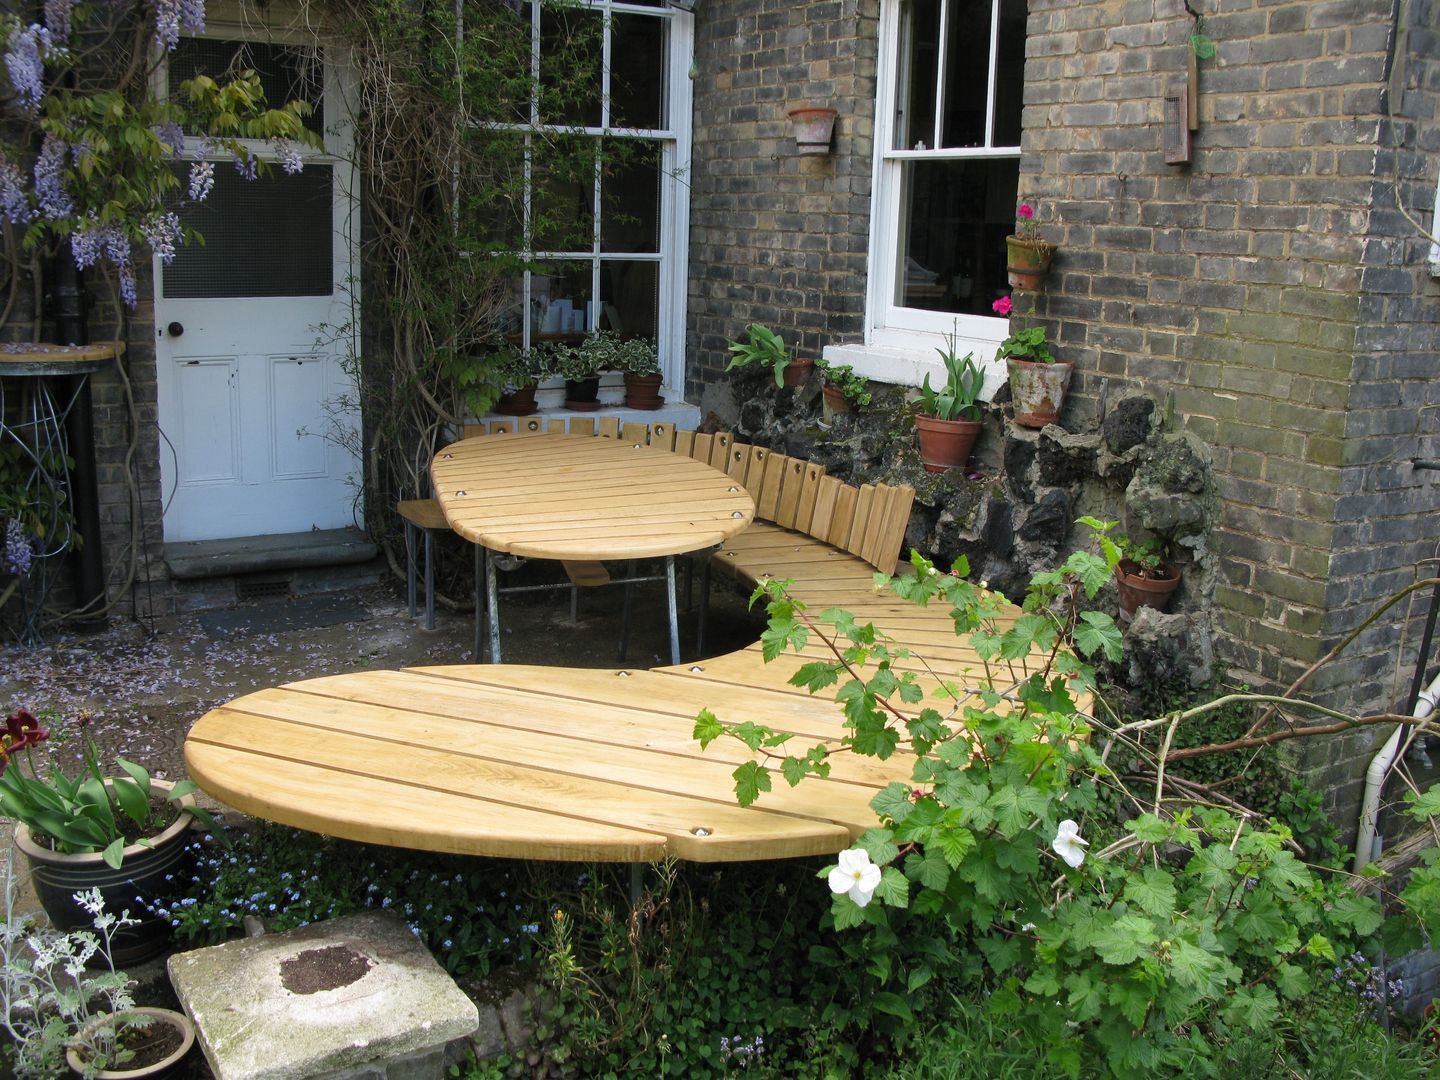 garden dining table and bench, tim germain furniture designer/maker tim germain furniture designer/maker Vườn phong cách chiết trung Furniture